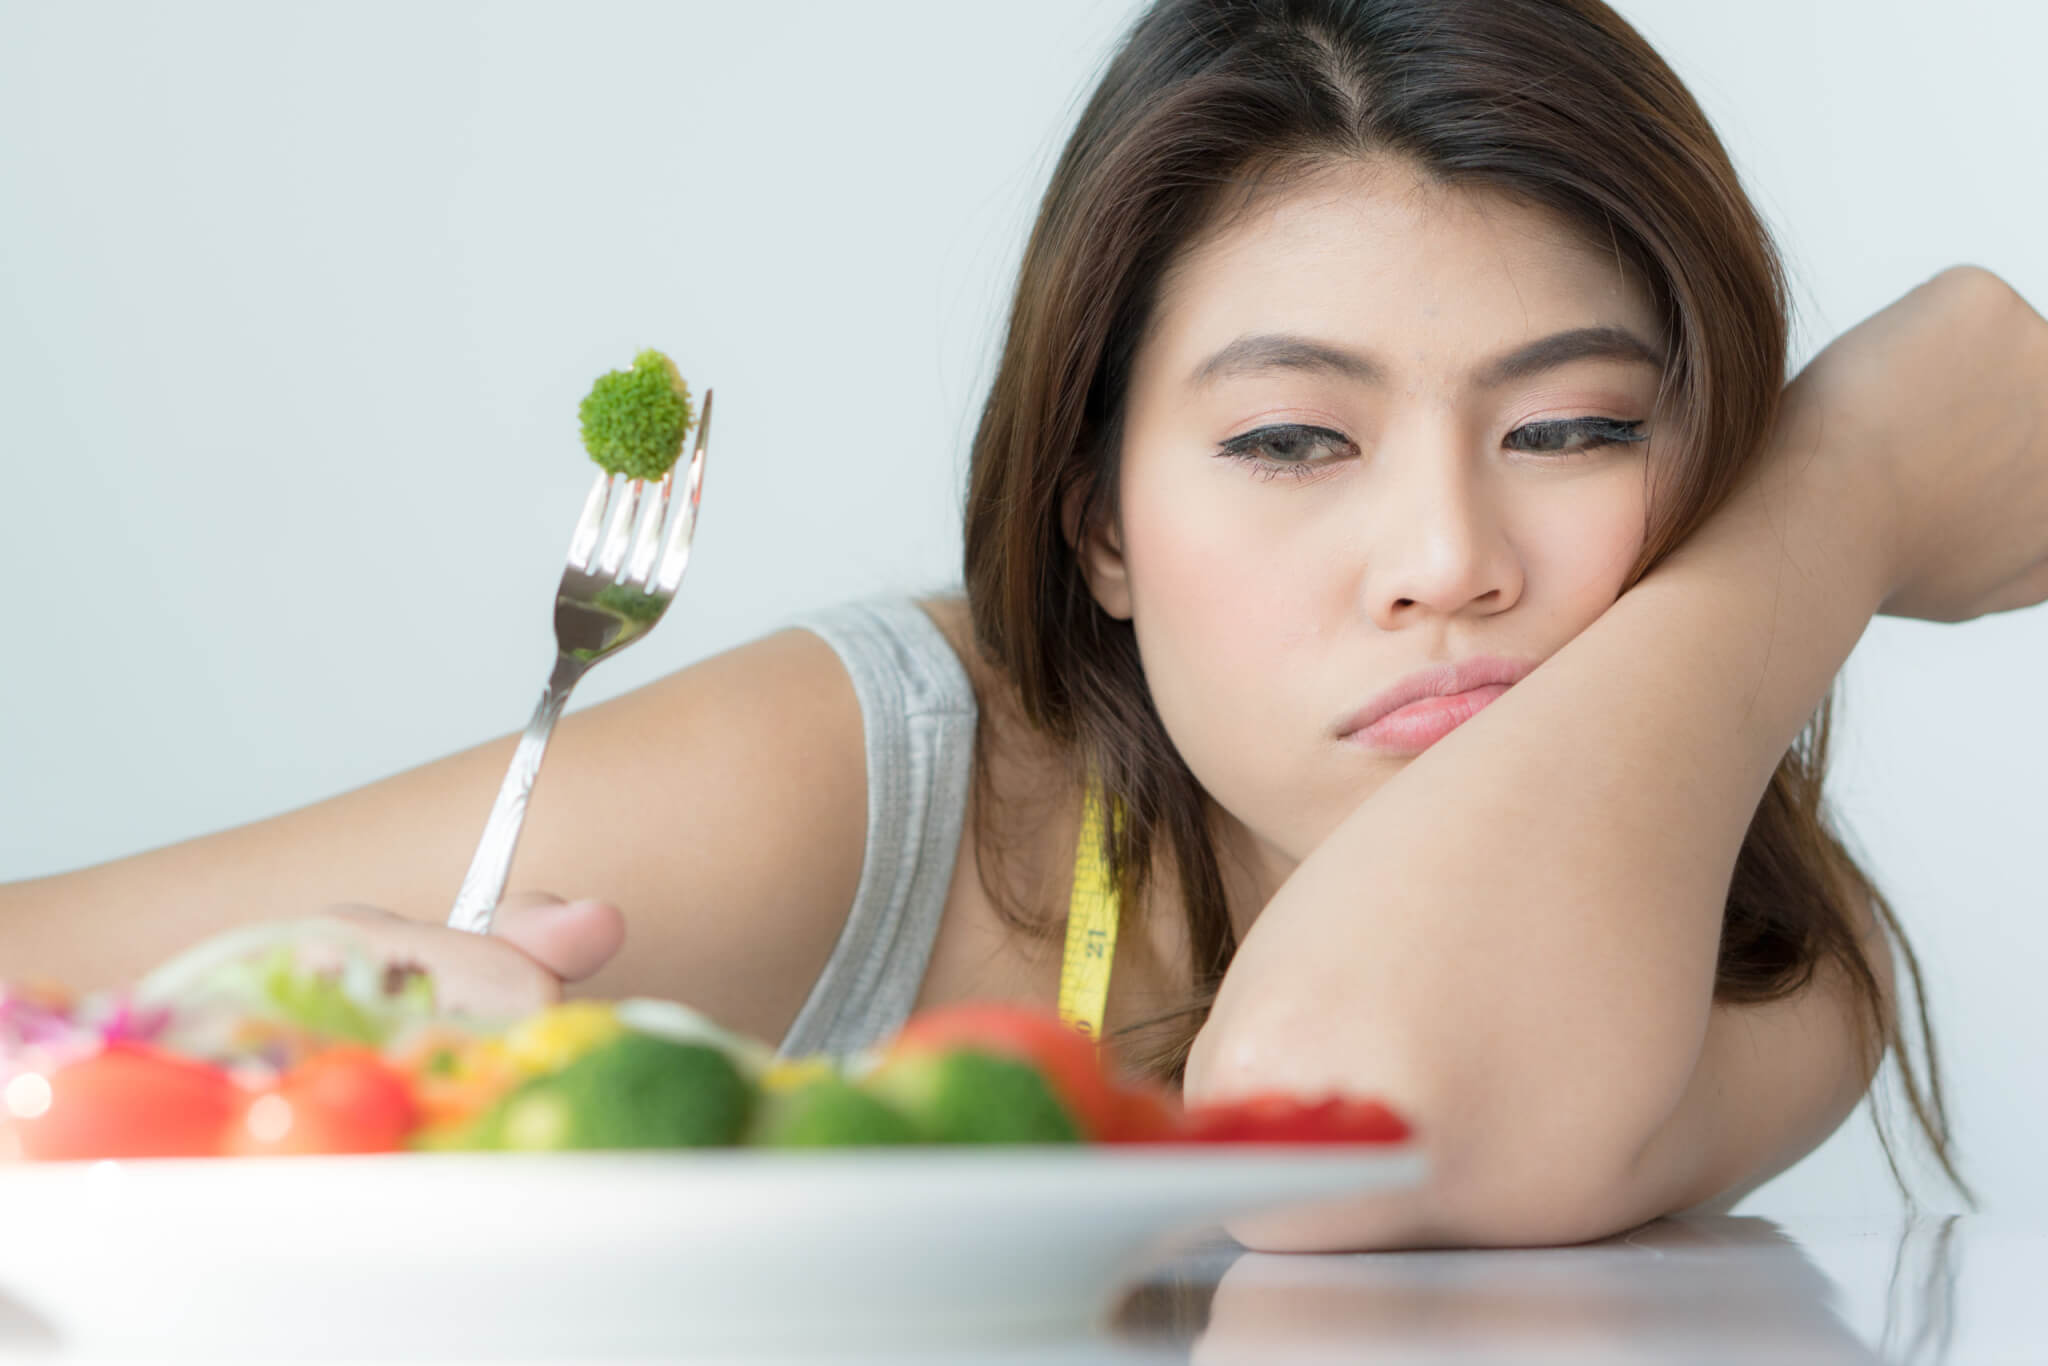 Plant-based BS! Half of Americans think living ‘healthy lifestyle’ would make them miserable